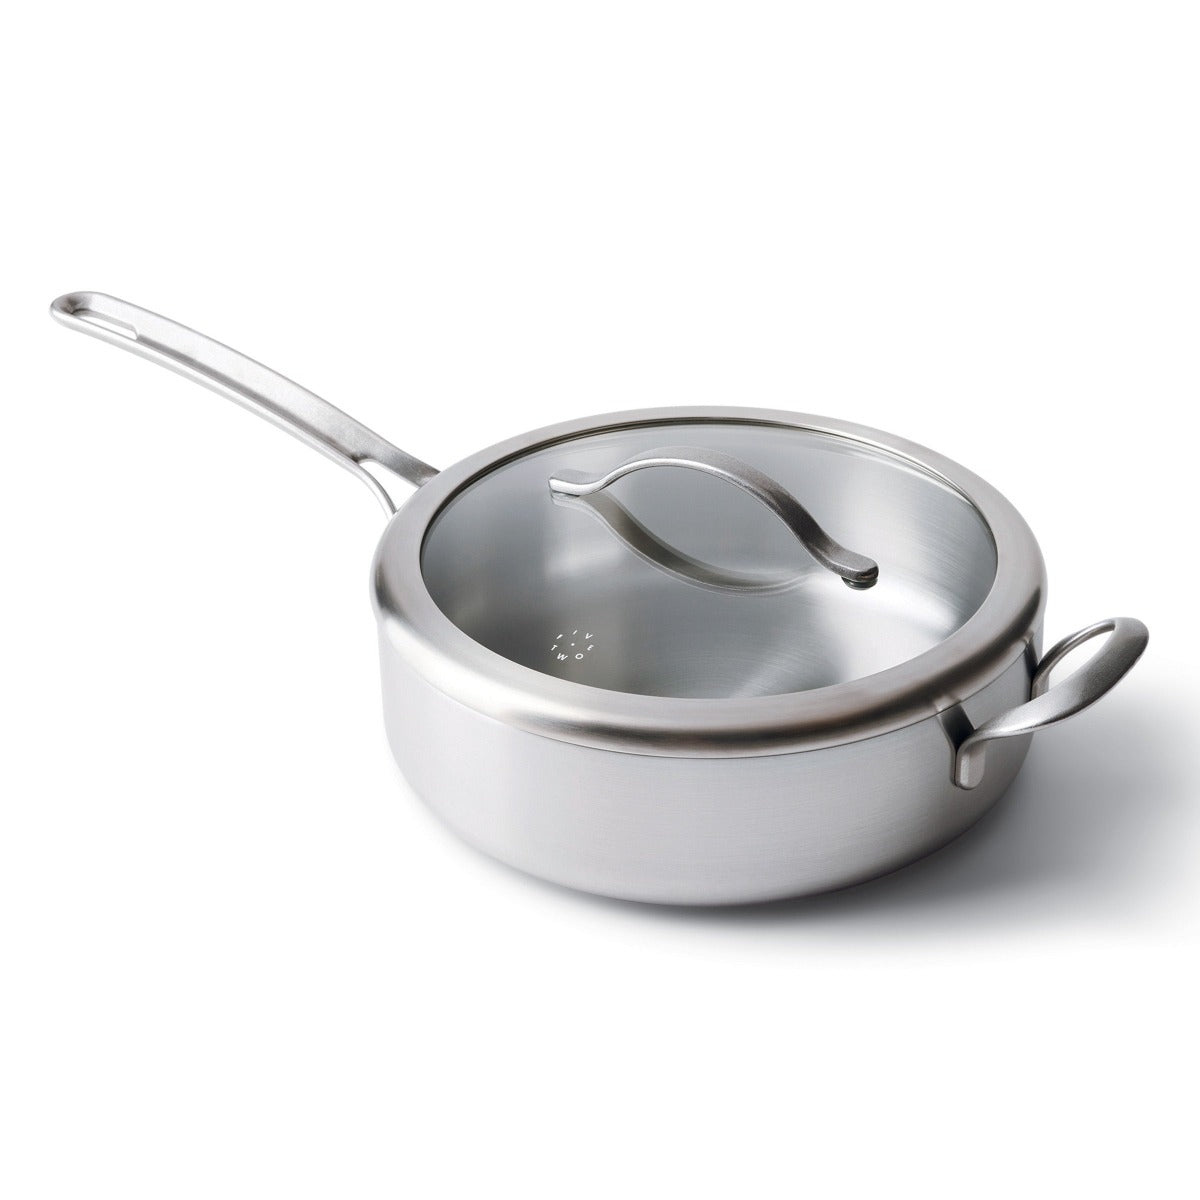 4 Qt. Stainless Steel Deep Saute Pan With Cover